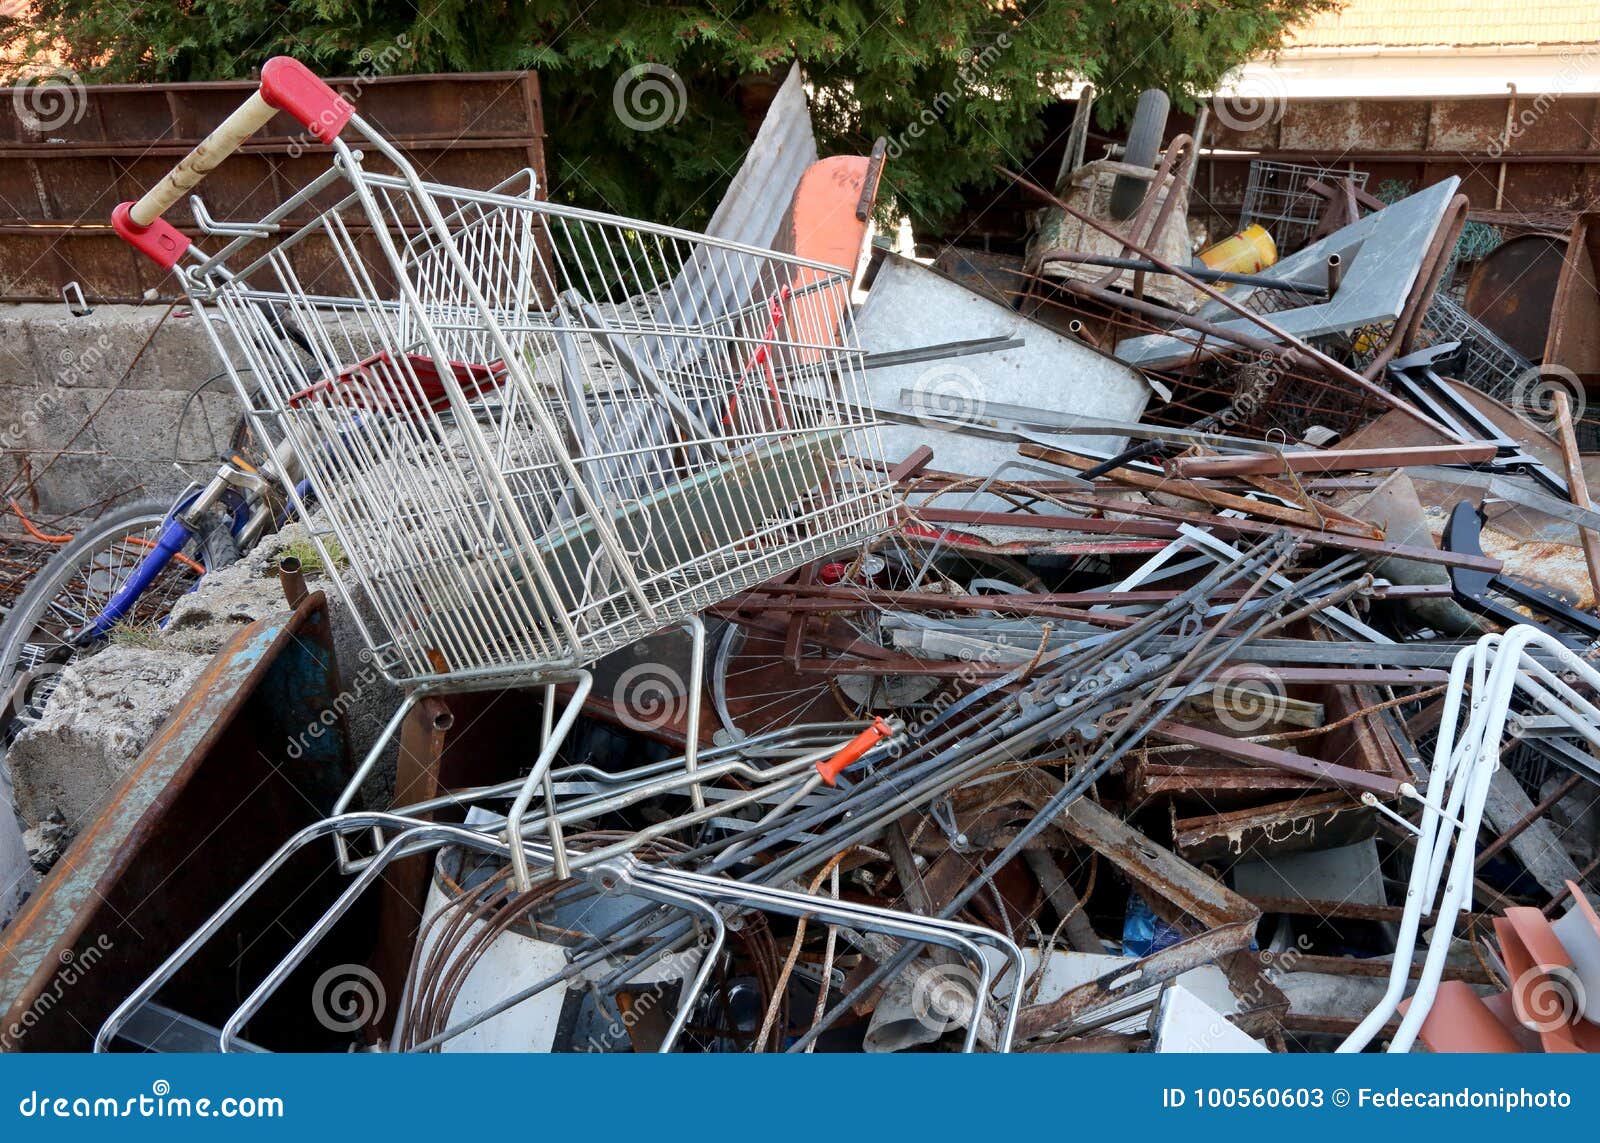 https://thumbs.dreamstime.com/z/rusty-shopping-trolley-recycling-ferrous-material-rusty-shopping-trolley-recycling-ferrous-material-disposal-100560603.jpg